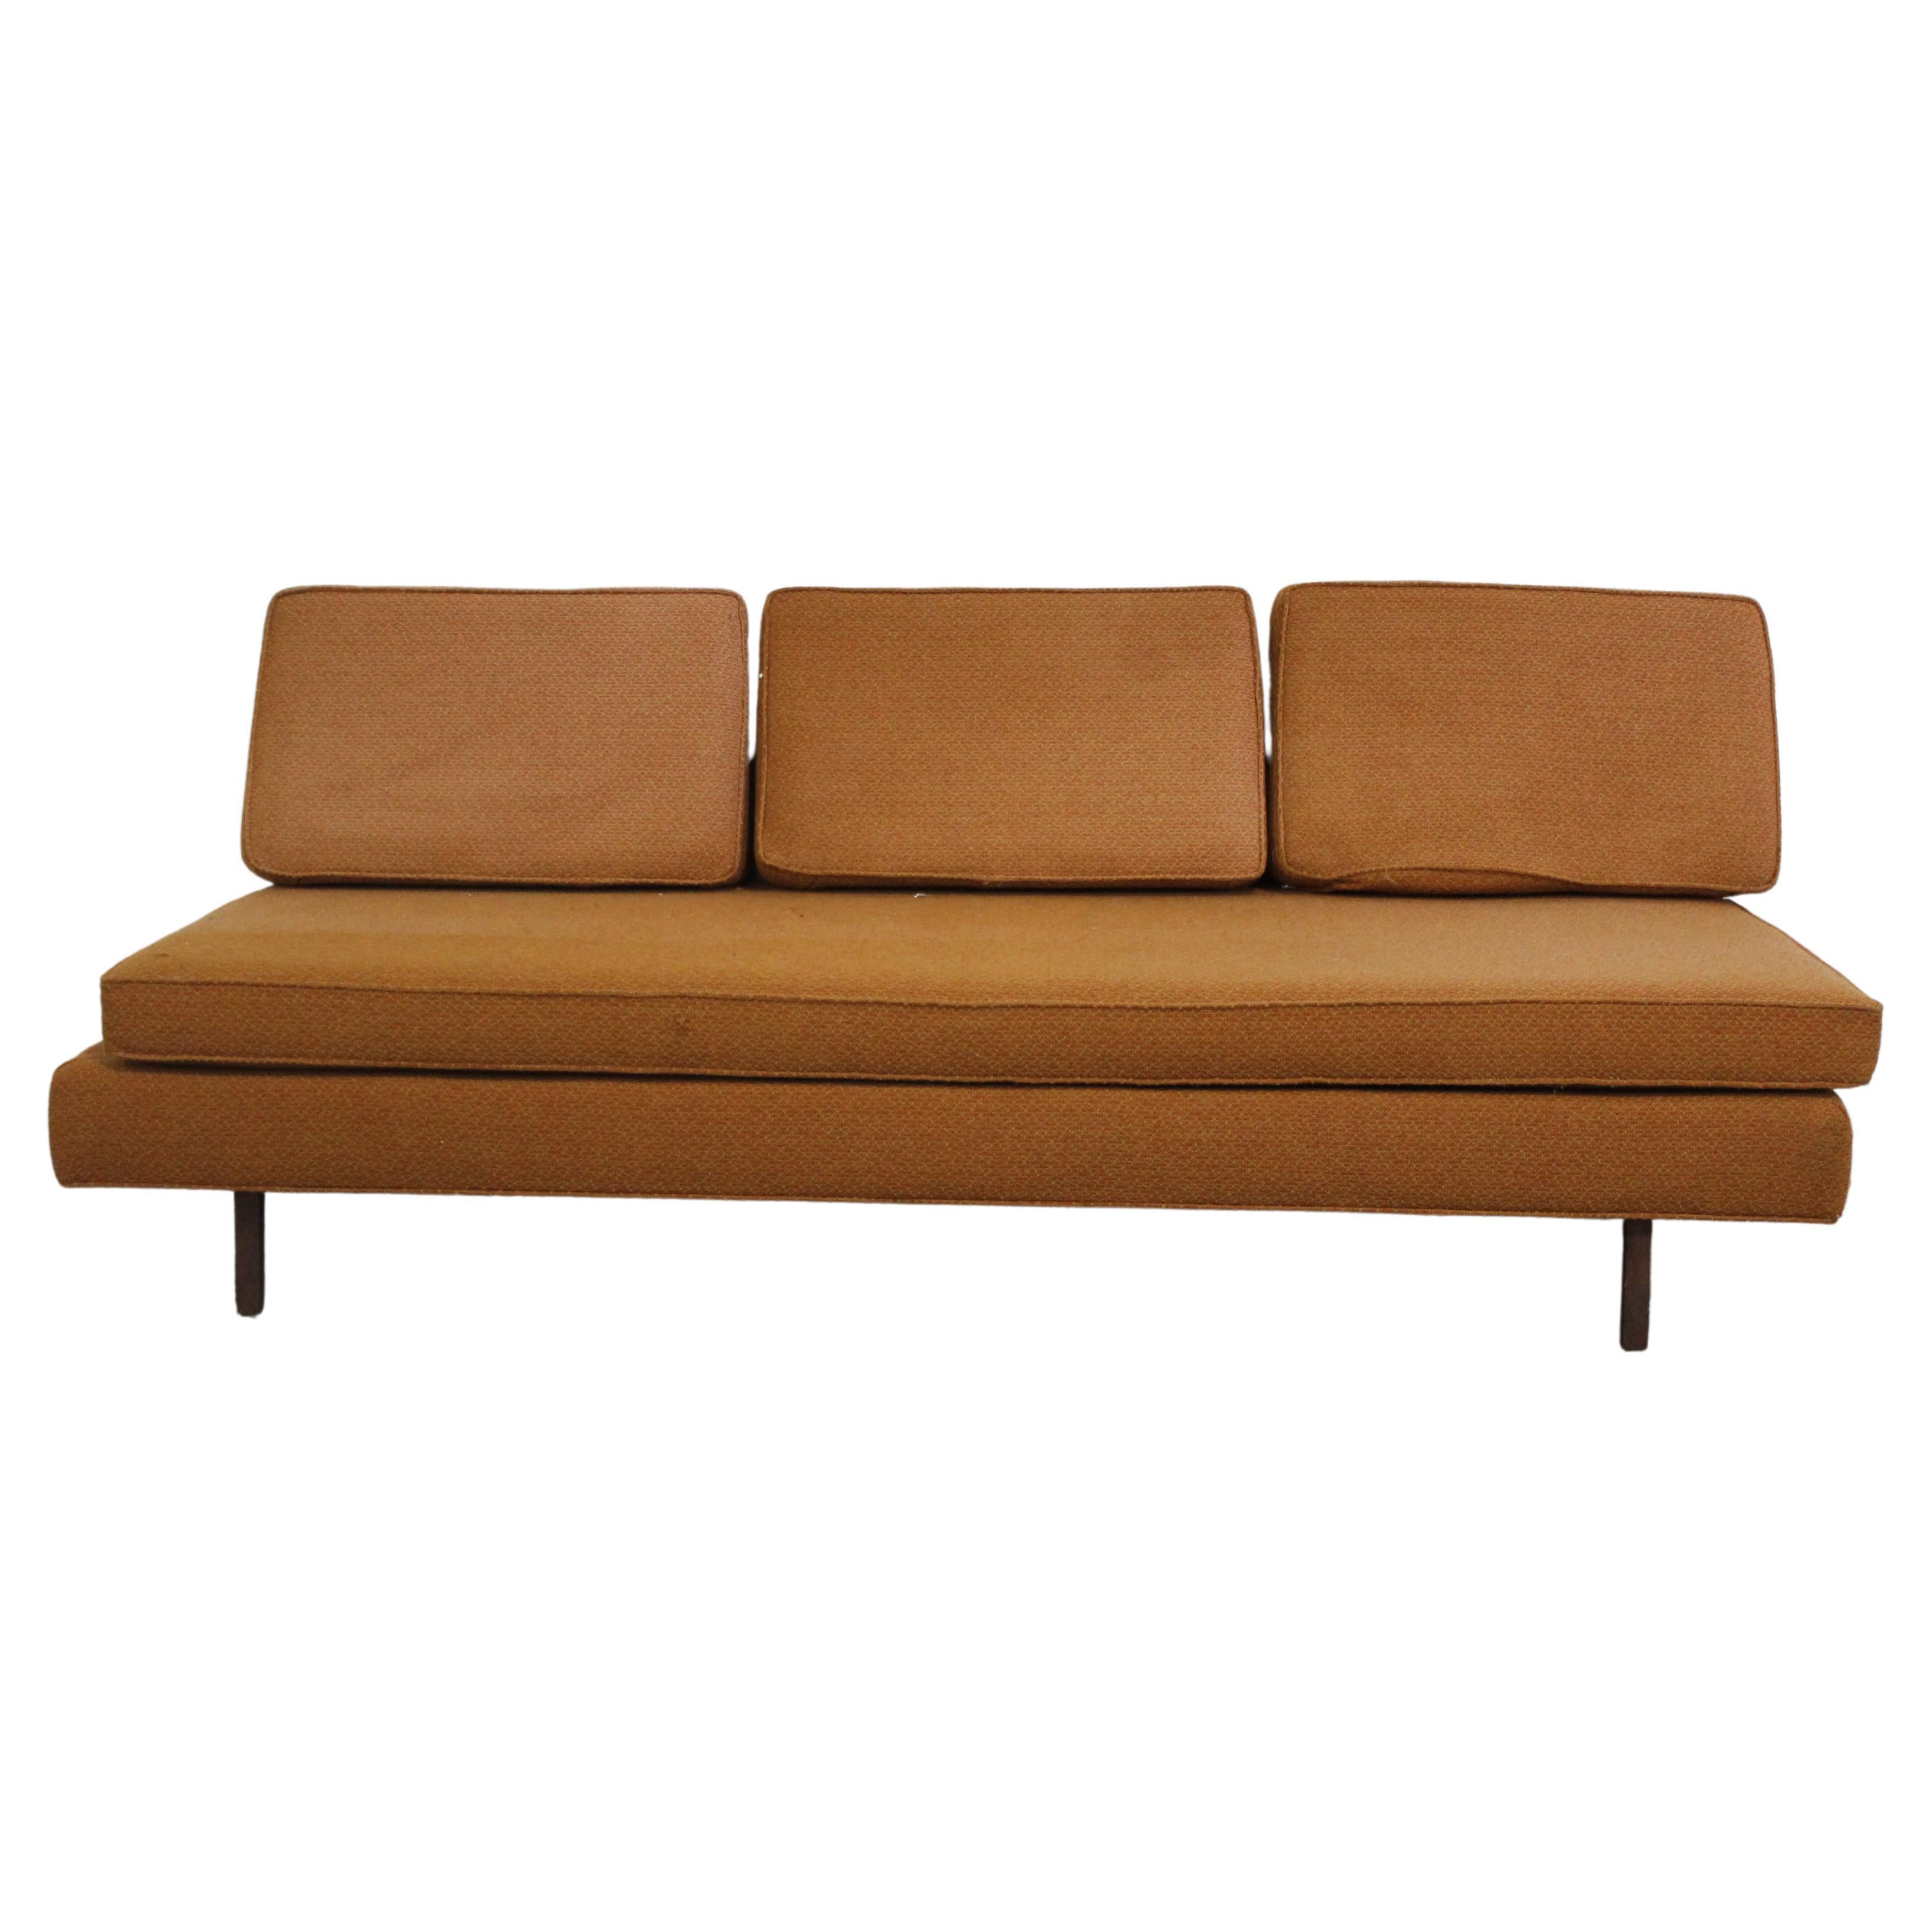 Mid-Century Modern Walnut Daybed / Sofa on Pencil Legs For Sale